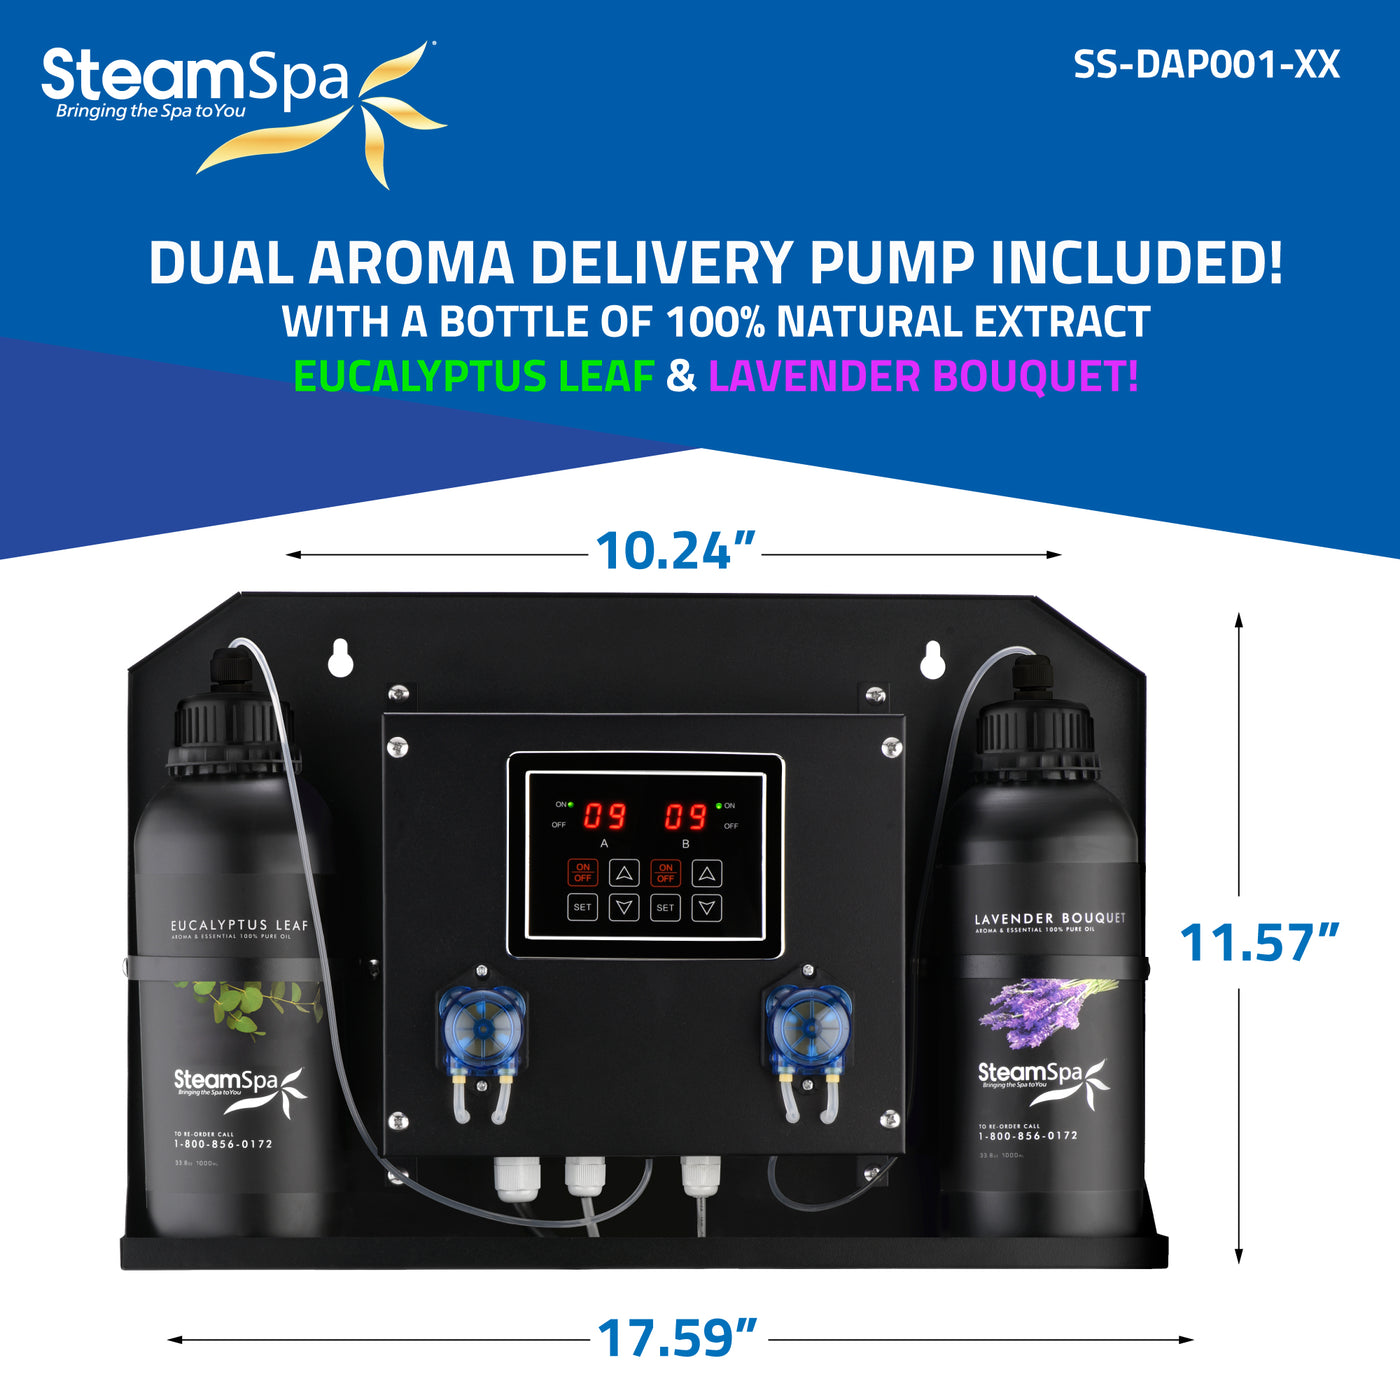 Black Series WiFi and Bluetooth 9kW QuickStart Steam Bath Generator Package with Dual Aroma Pump in Polished Chrome BKT900CH-ADP